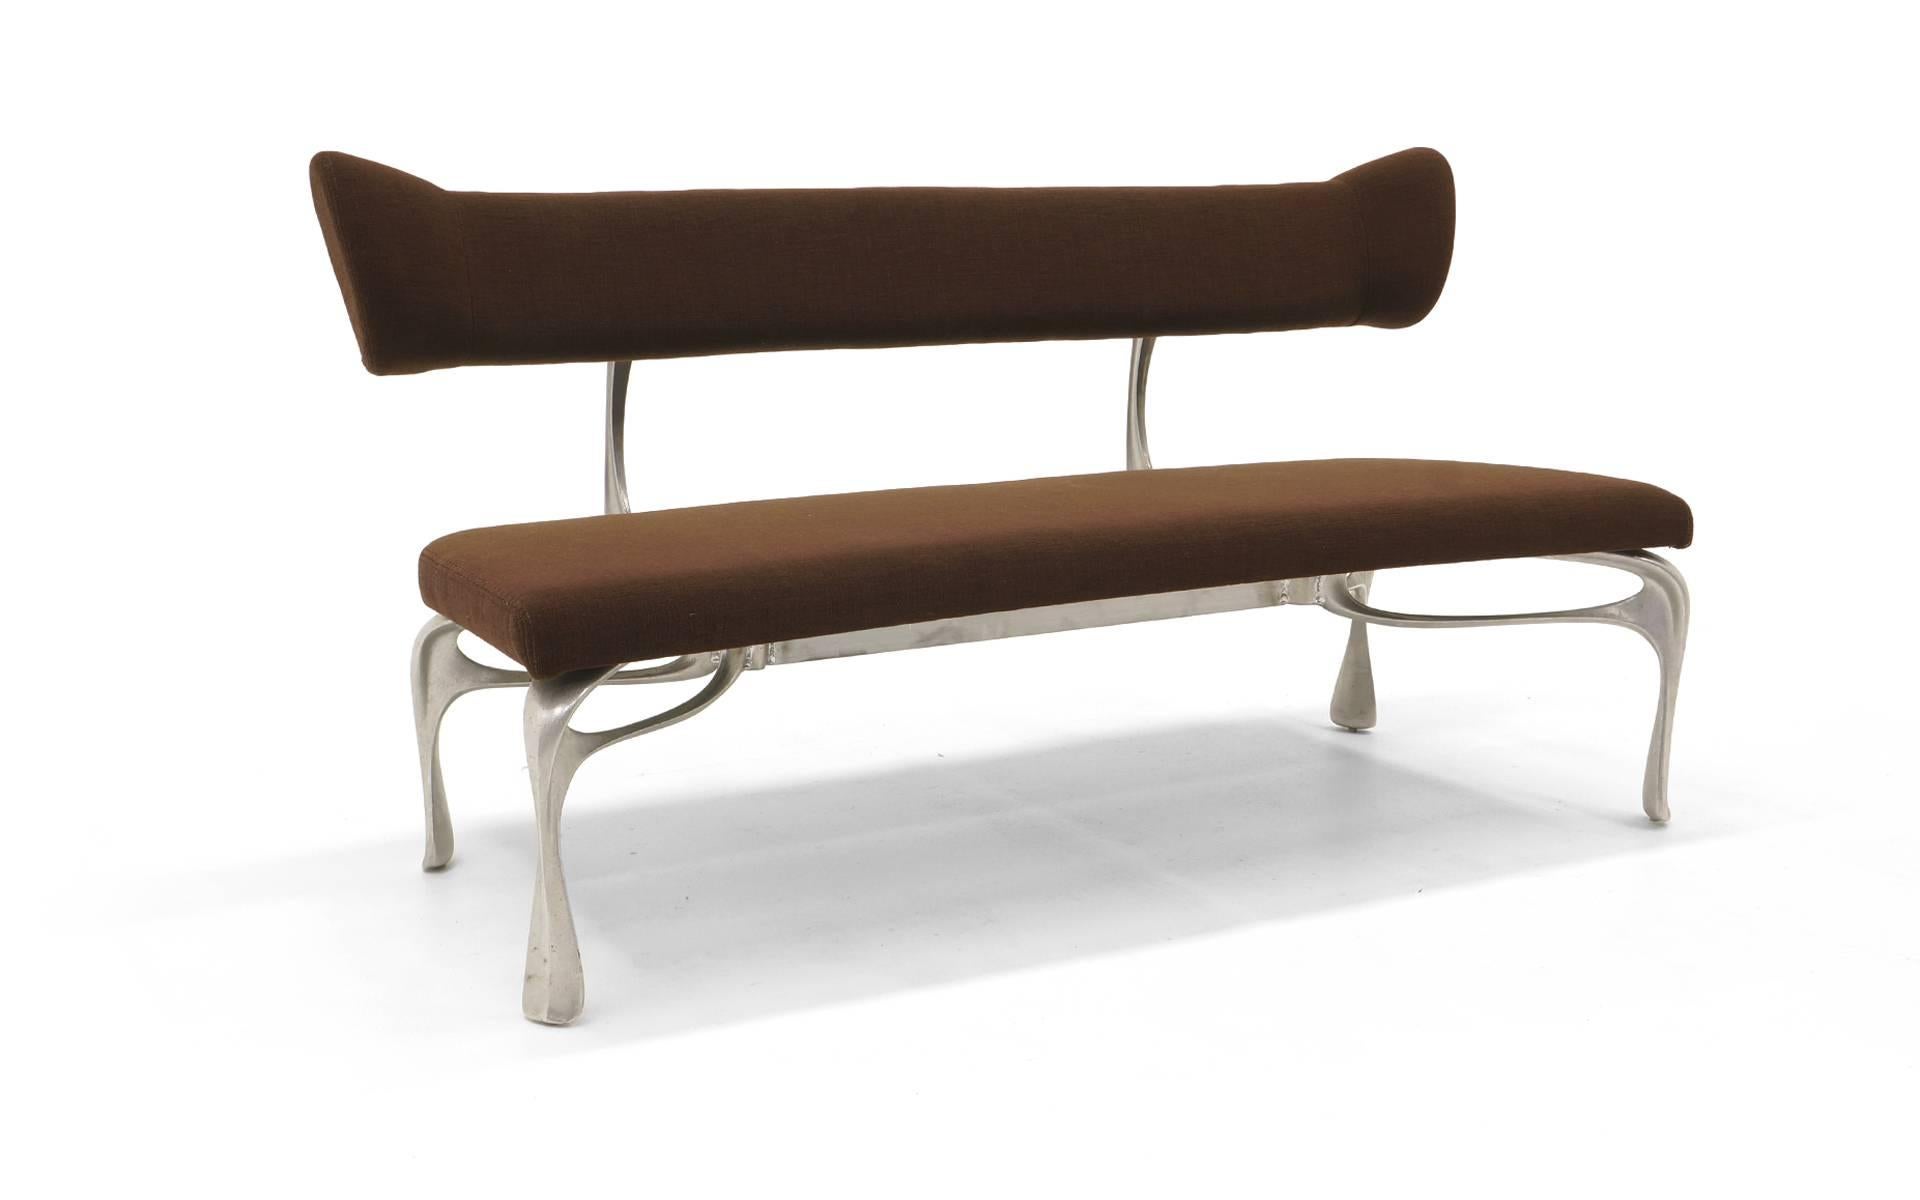 This small sofa / love seat / bench is a one of a kind prototype designed by Jordan Mozer, Chicago. This was never put into production due to high manufacturing costs. A rare opportunity to own a truly unique piece of sculptural modern design by